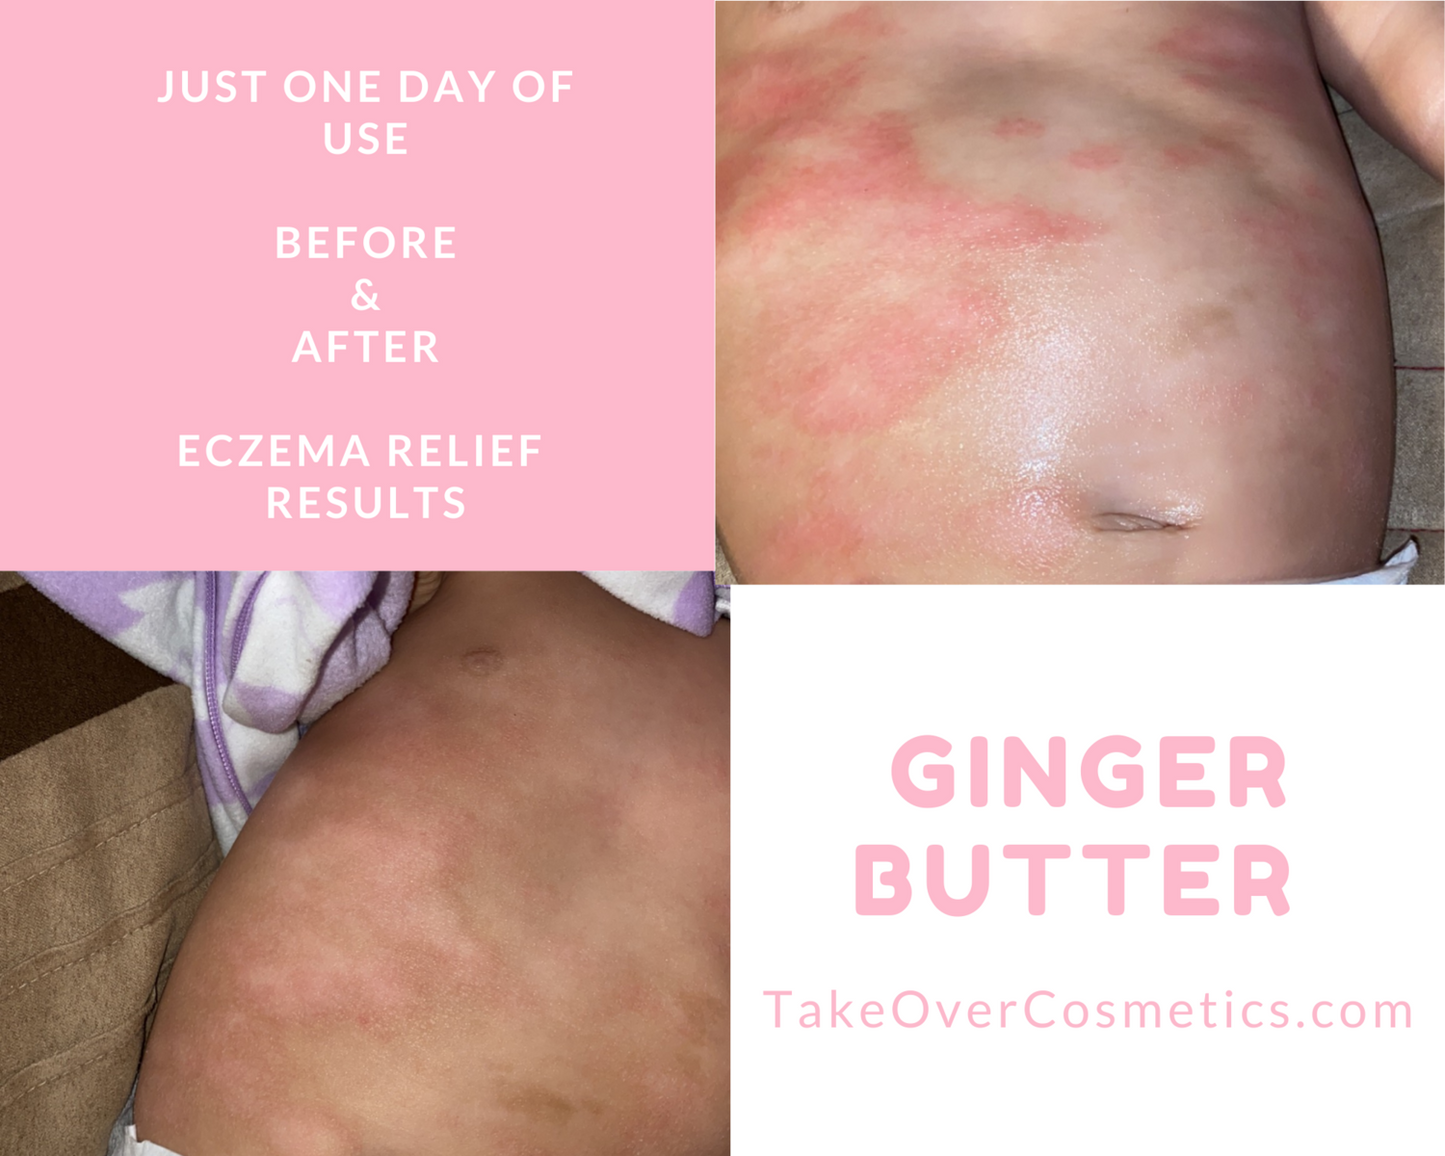 Ginger Eczema Soothing Body Butter